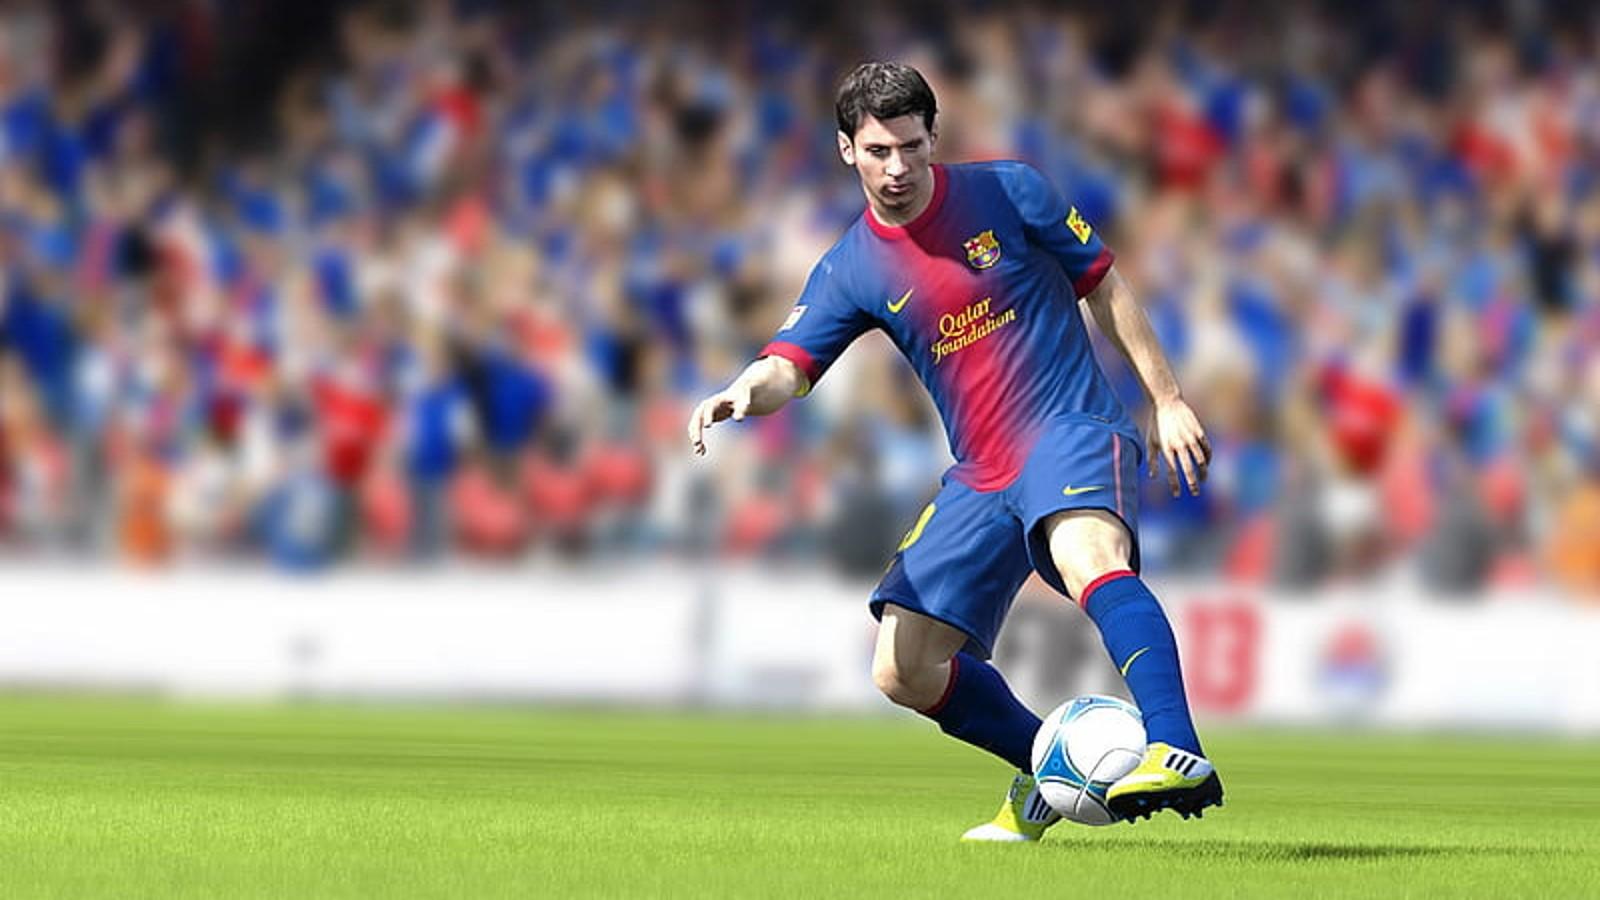 A screenshot from FIFA 13, a game with a popular soundtrack.